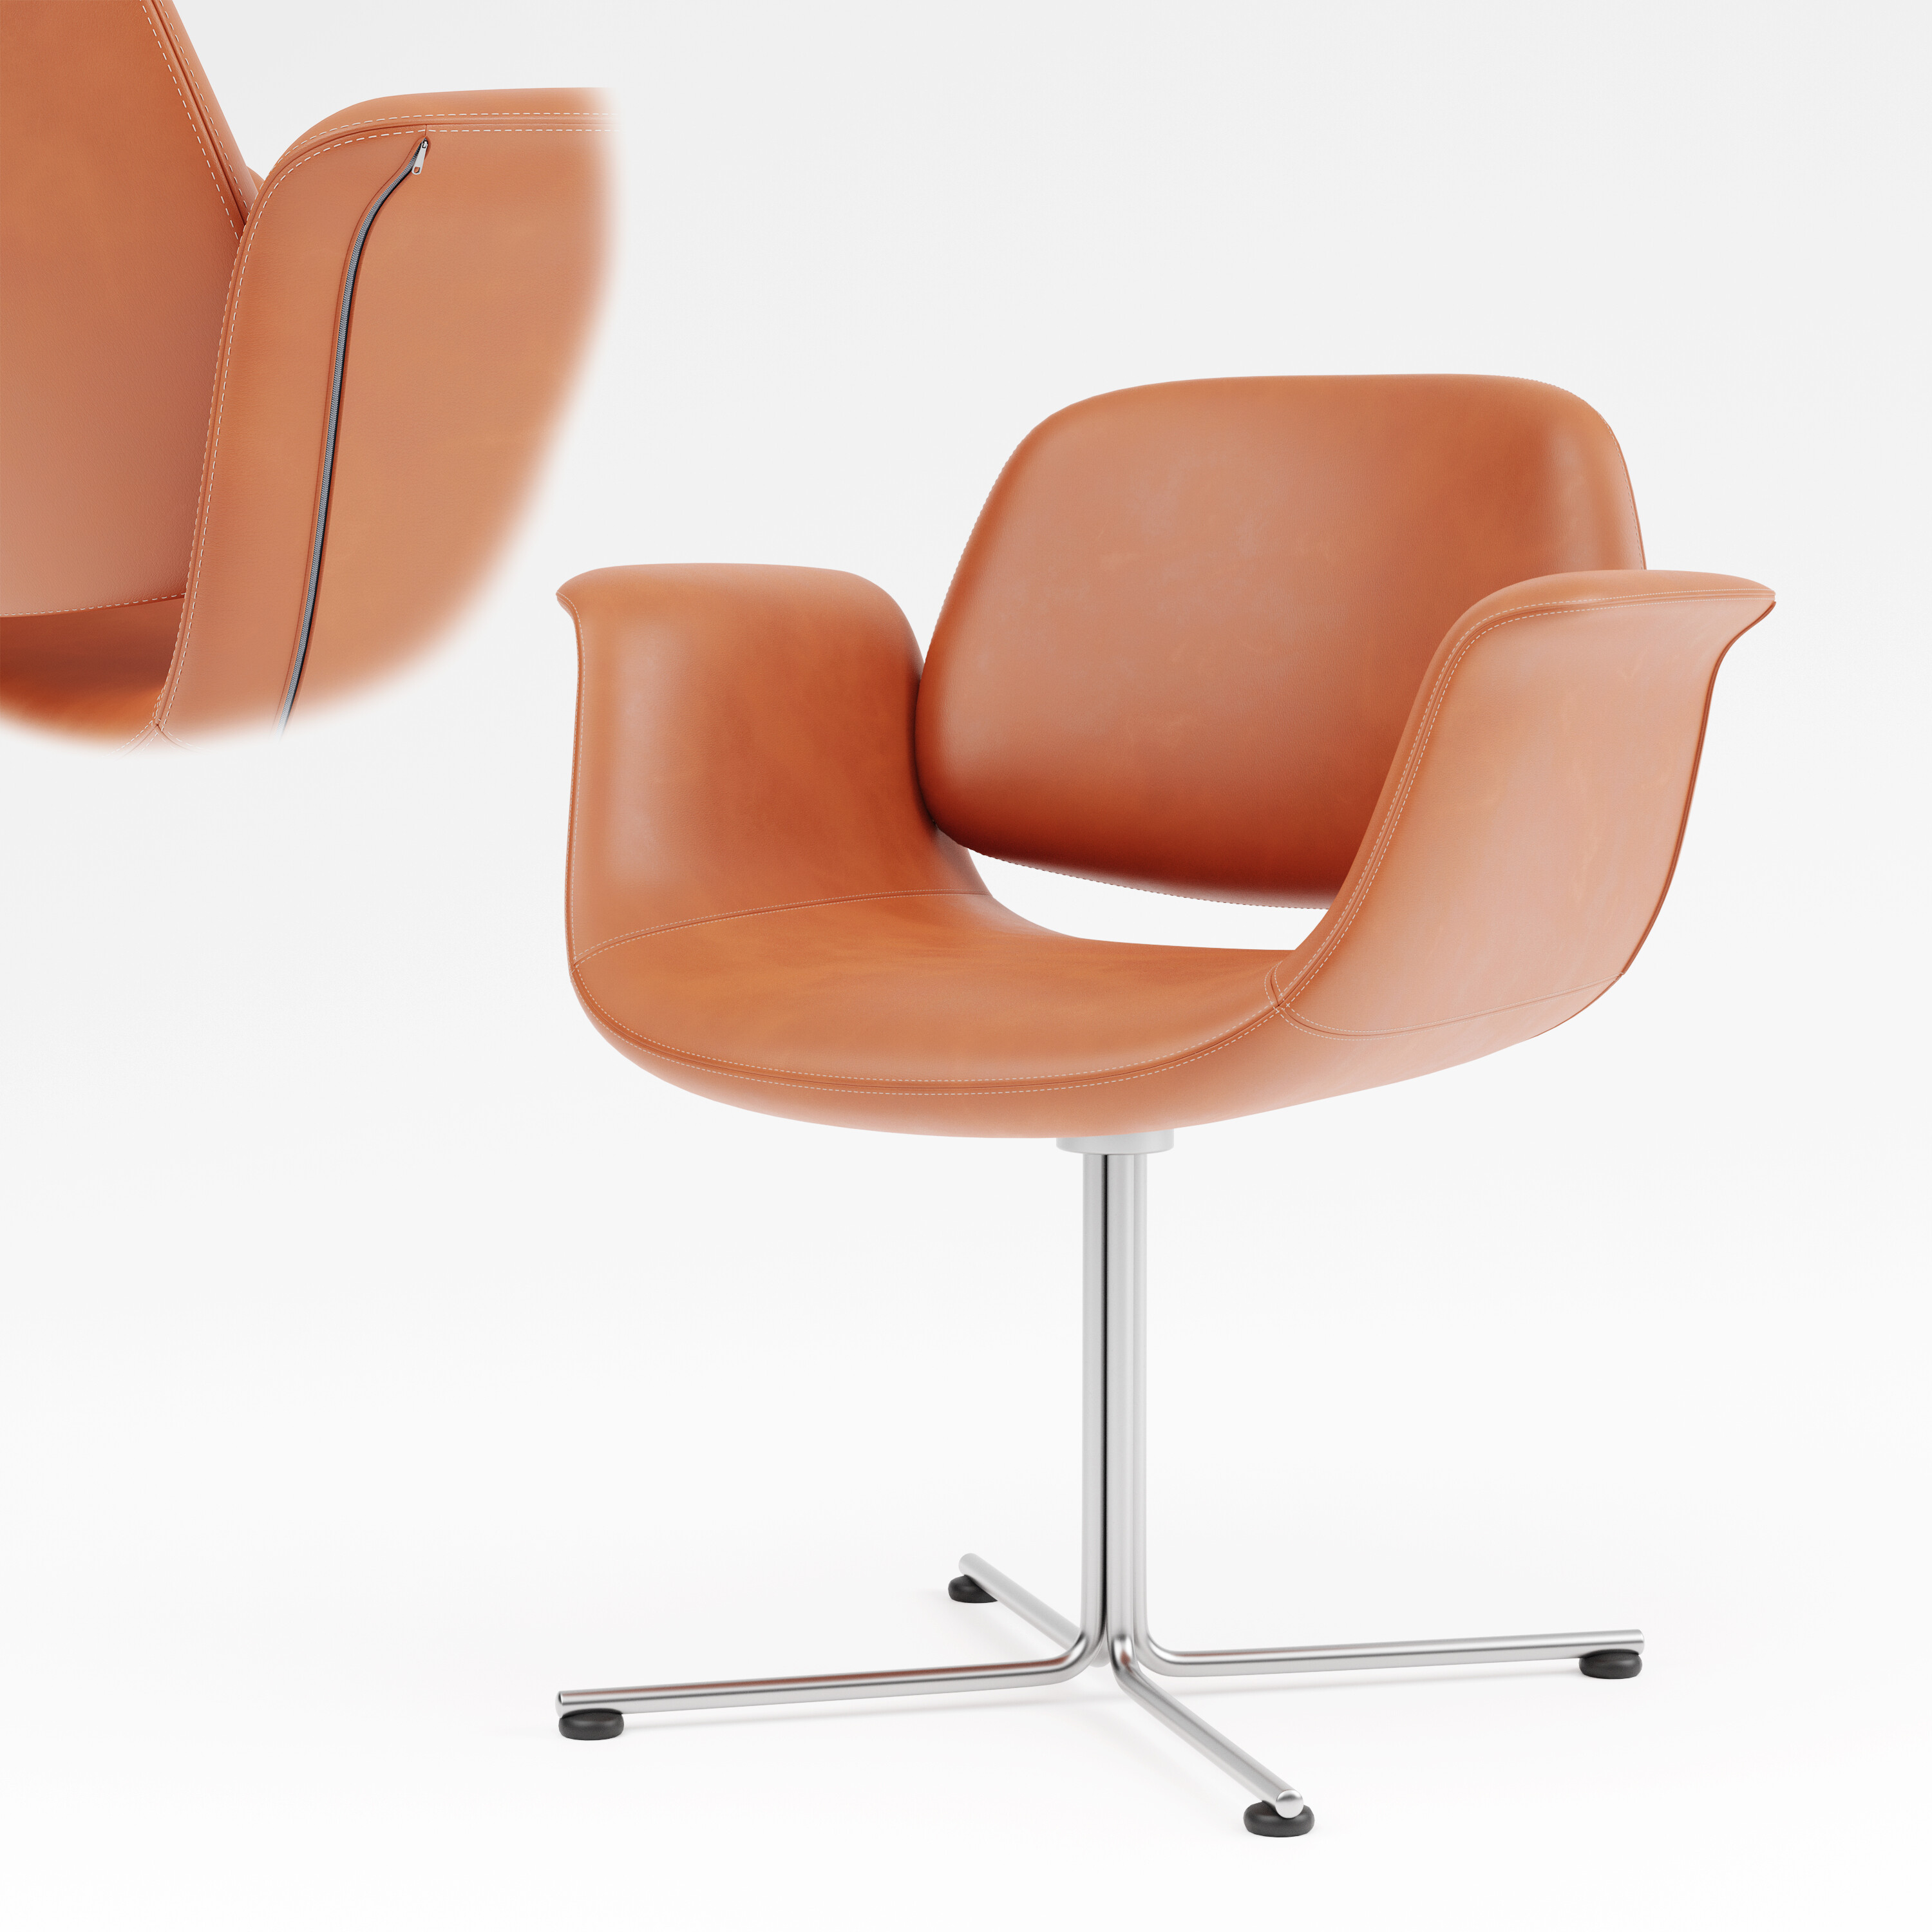 Fredericia Flamingo Chair - Finished Projects - Blender Artists Community